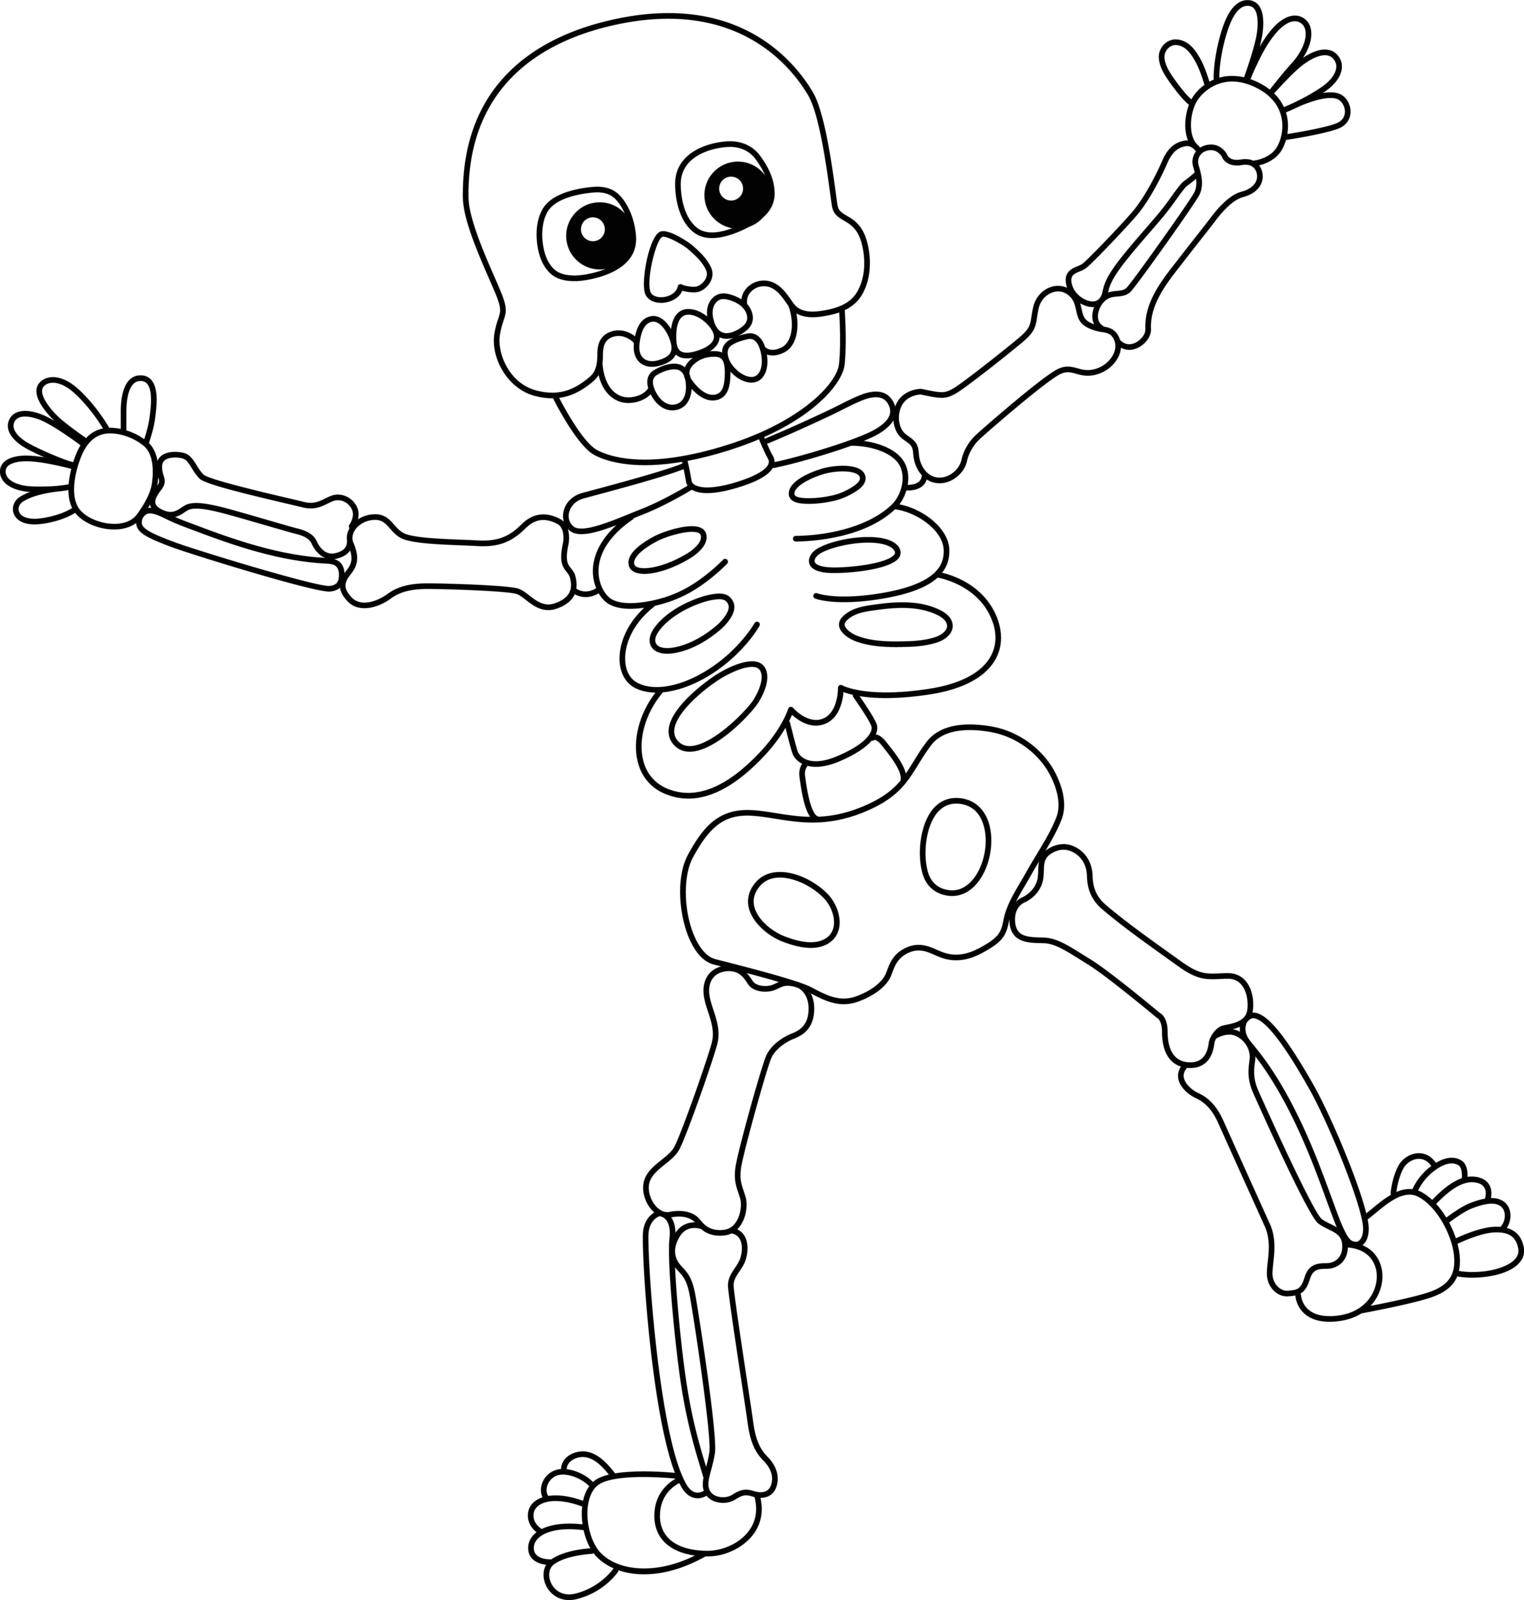 A cute and funny coloring page of a dancing skeleton. Provides hours of coloring fun for children. To color, this page is very easy. Suitable for little kids and toddlers.